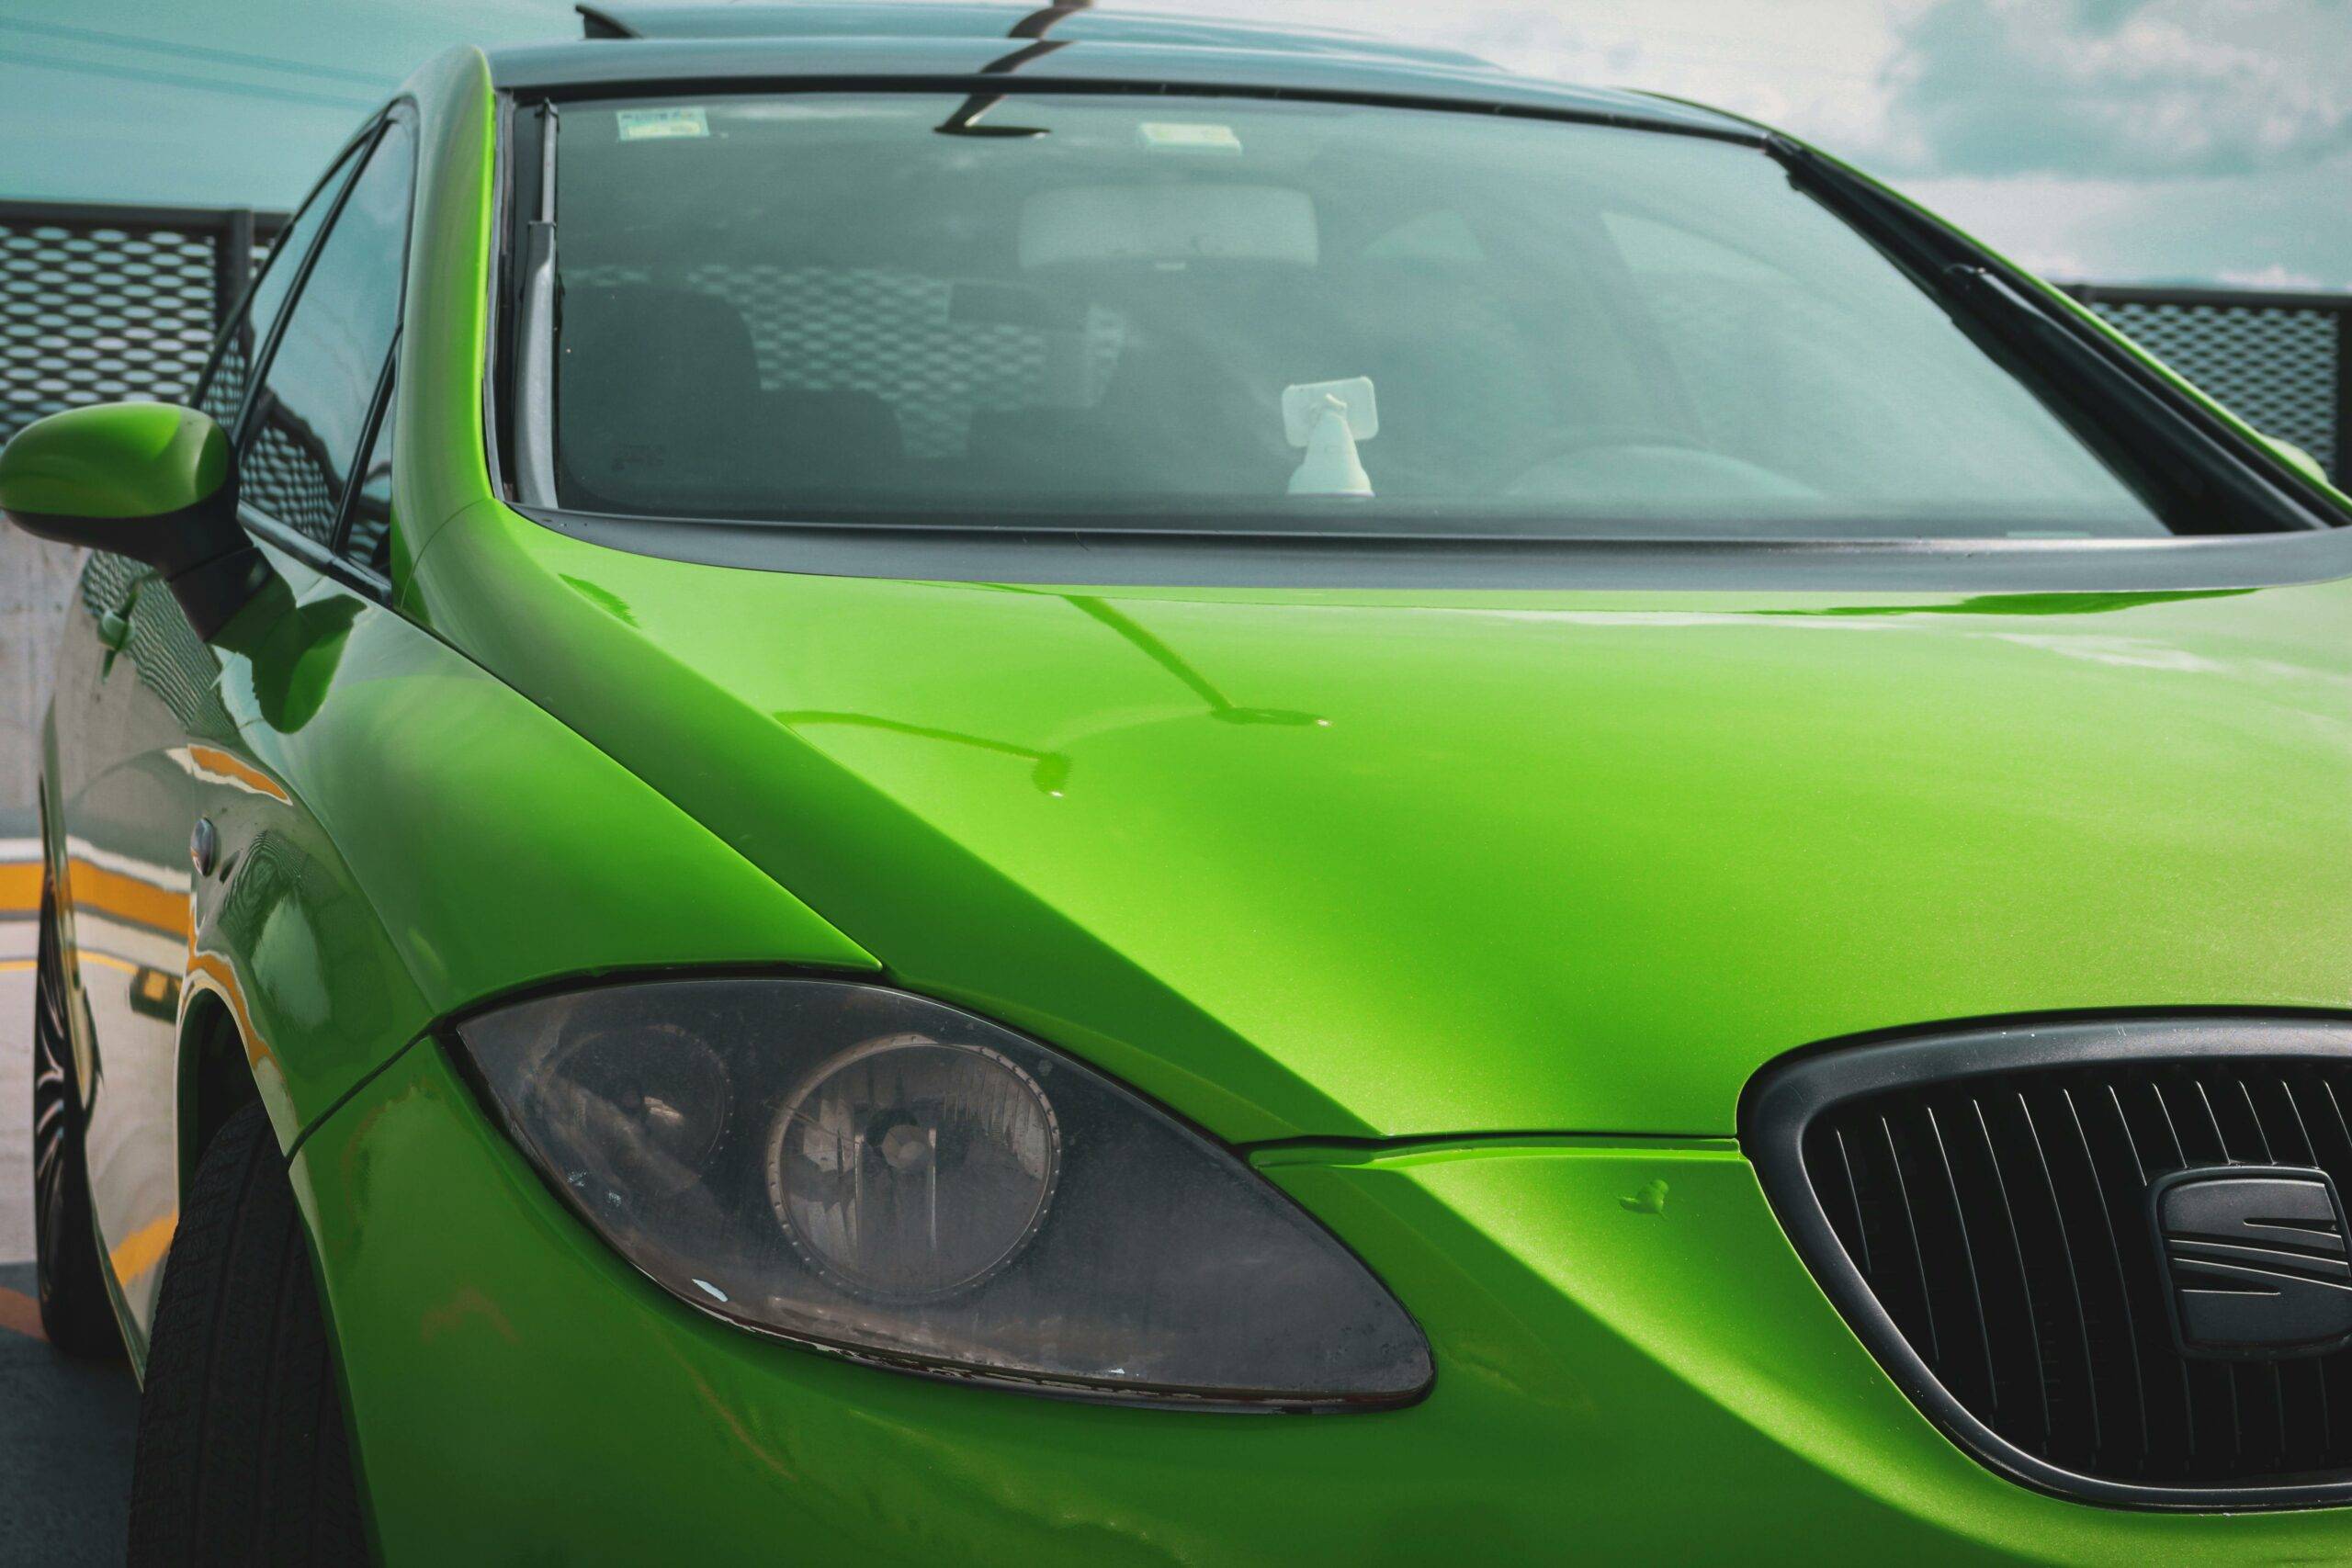 free photo of a green car with a green hood and green paint scaled